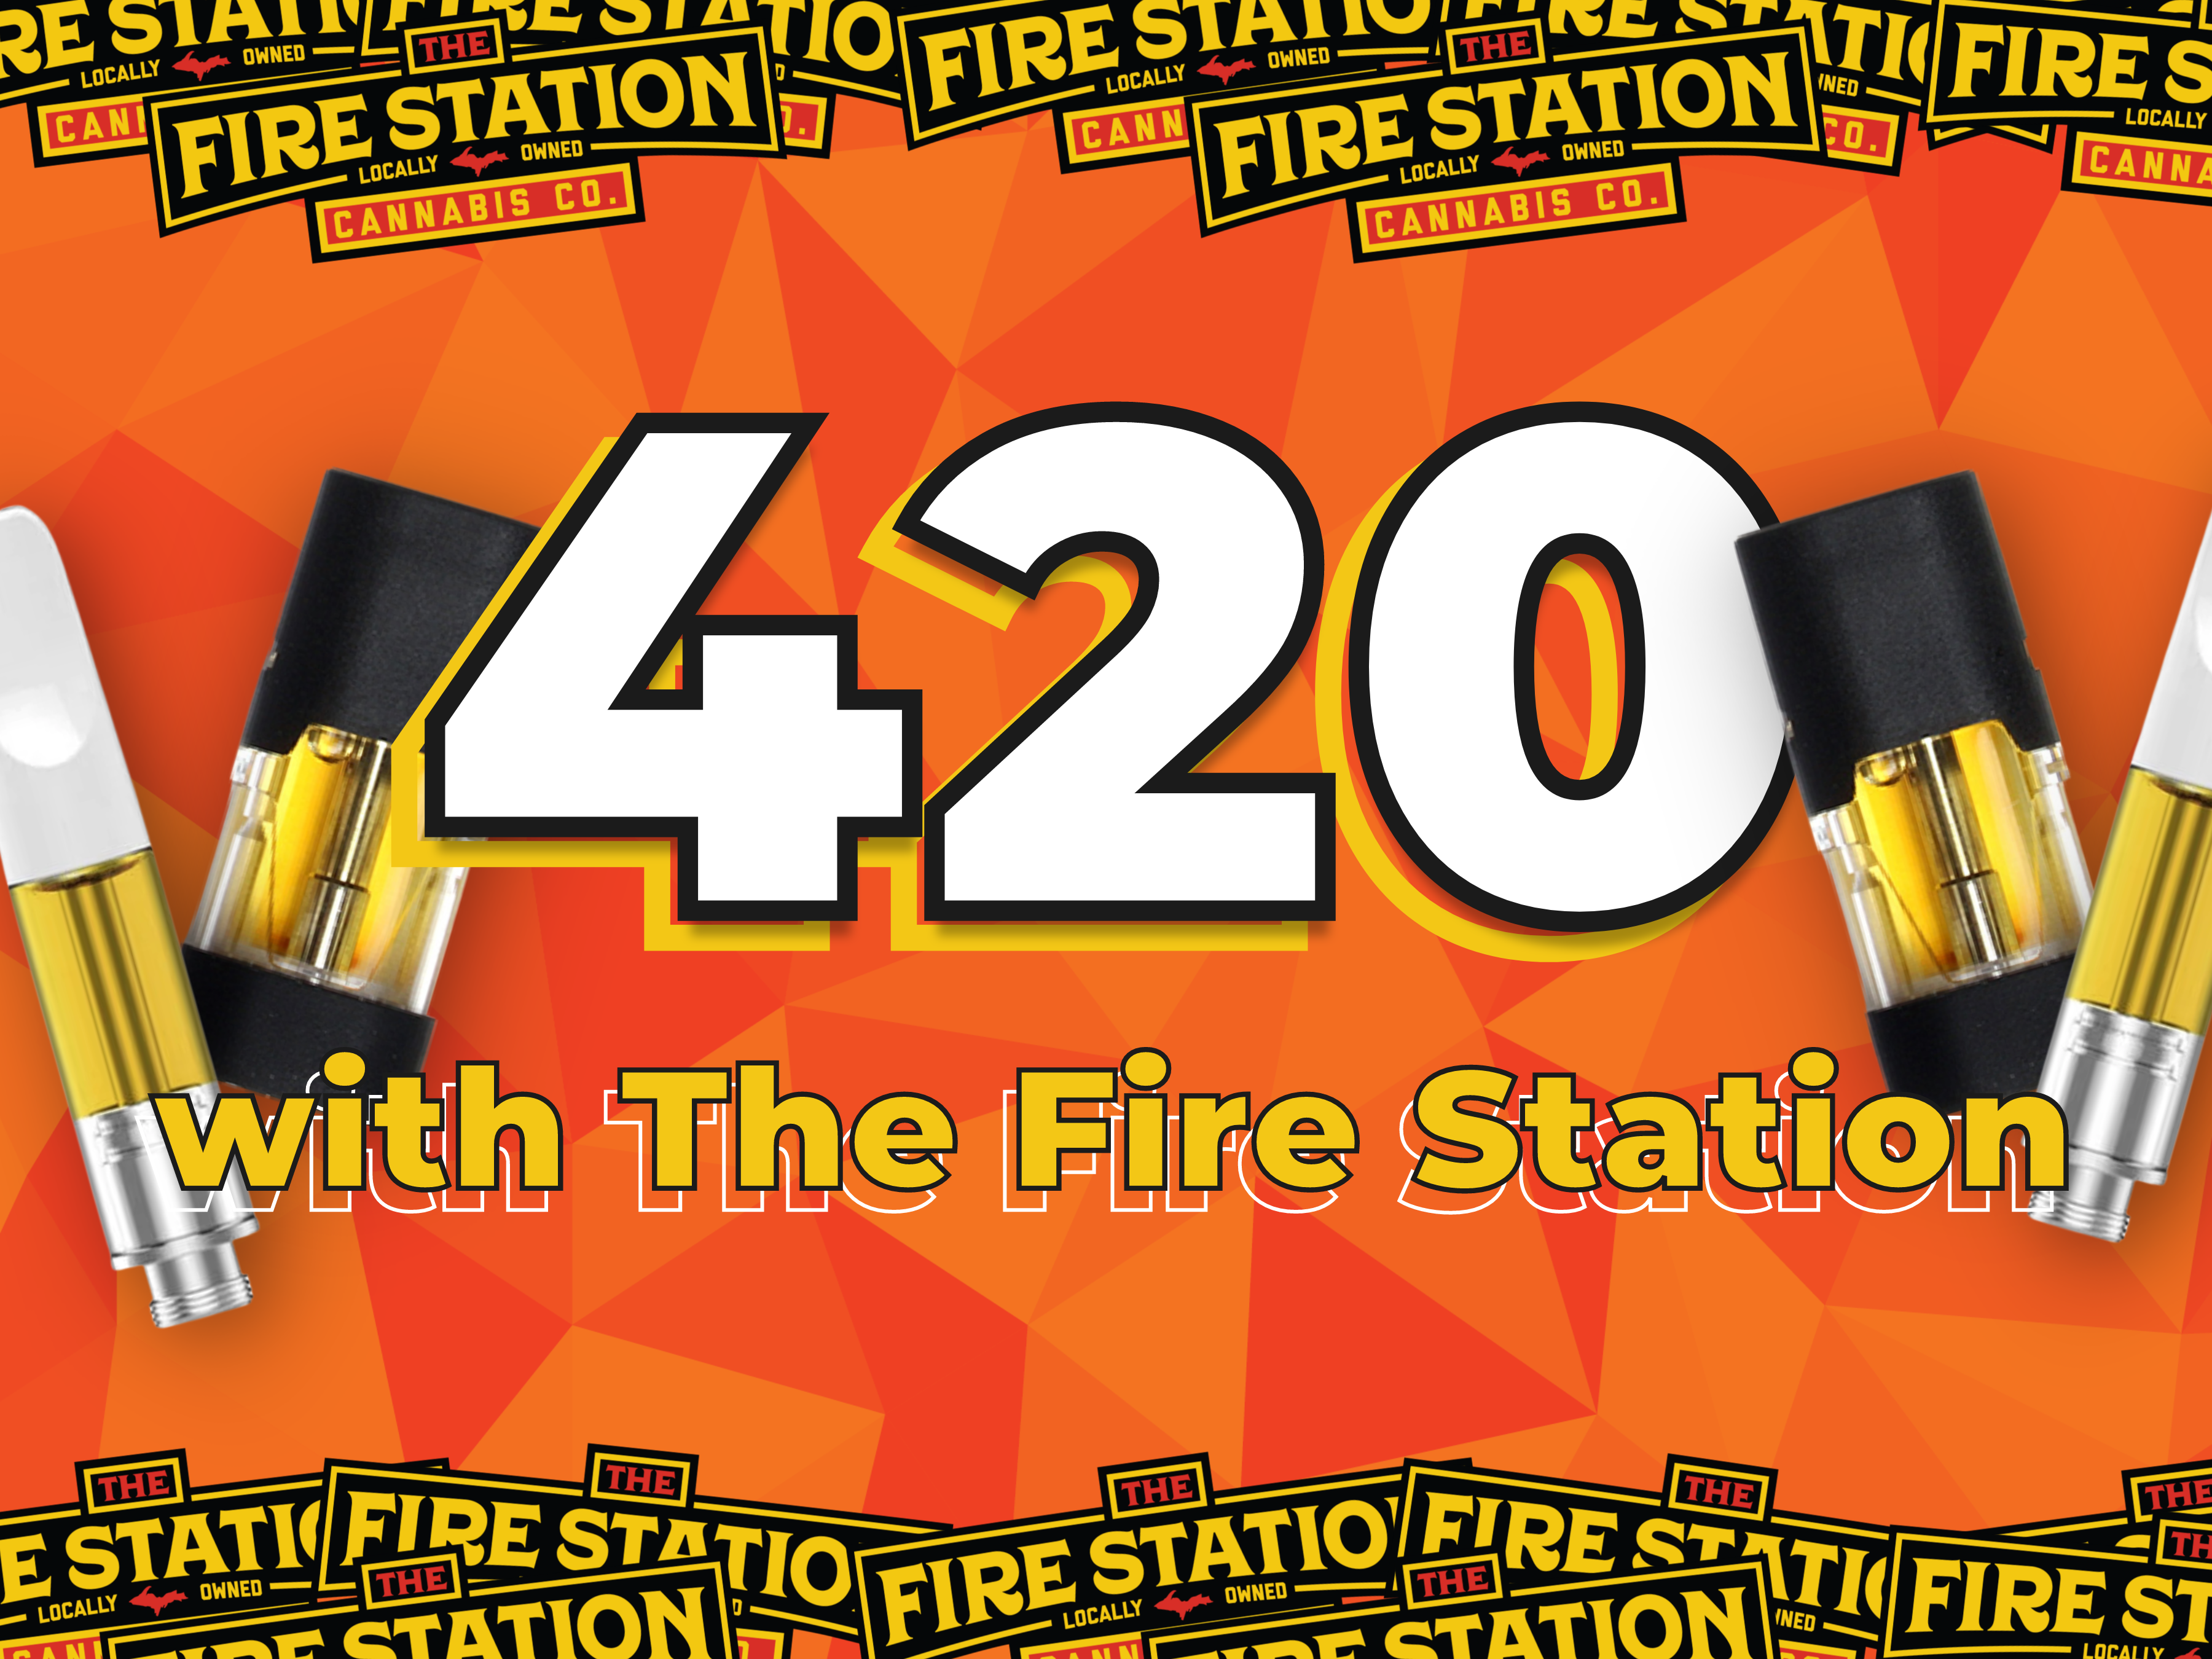 Celebrate 420 with The Fire Station